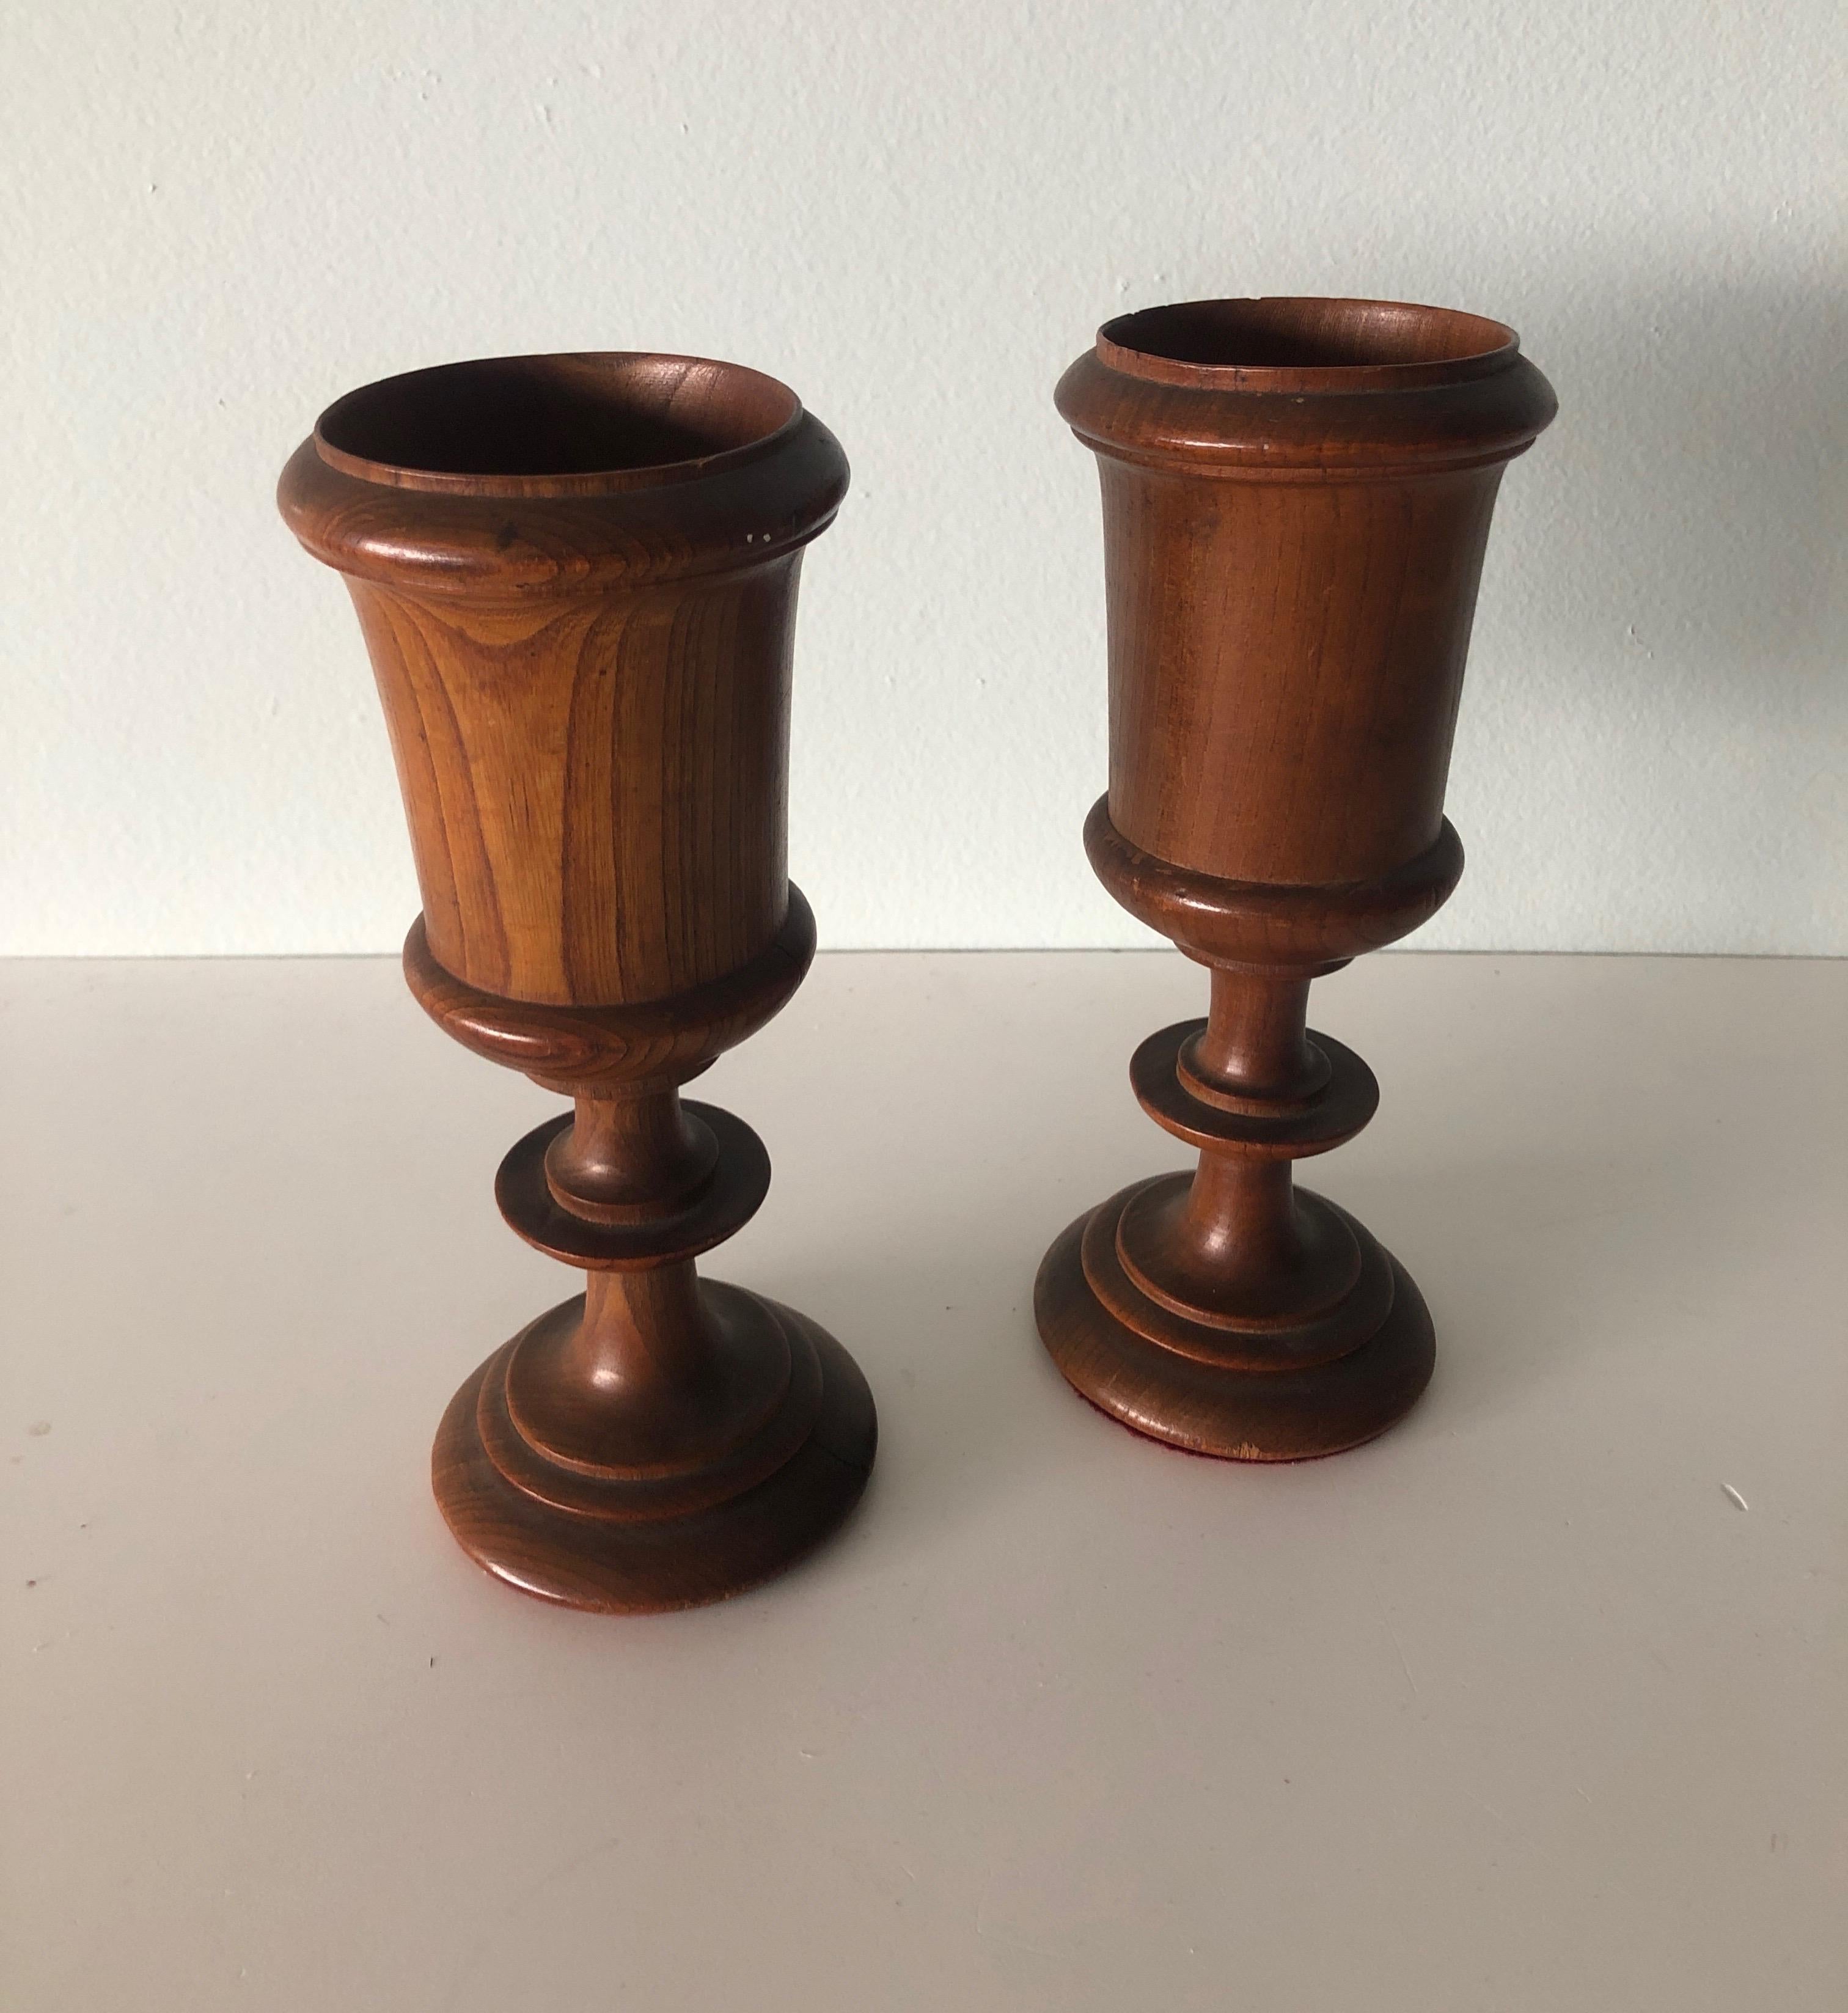 Pair of English antique wooden cups
Size: 3 x 2.5 x 8